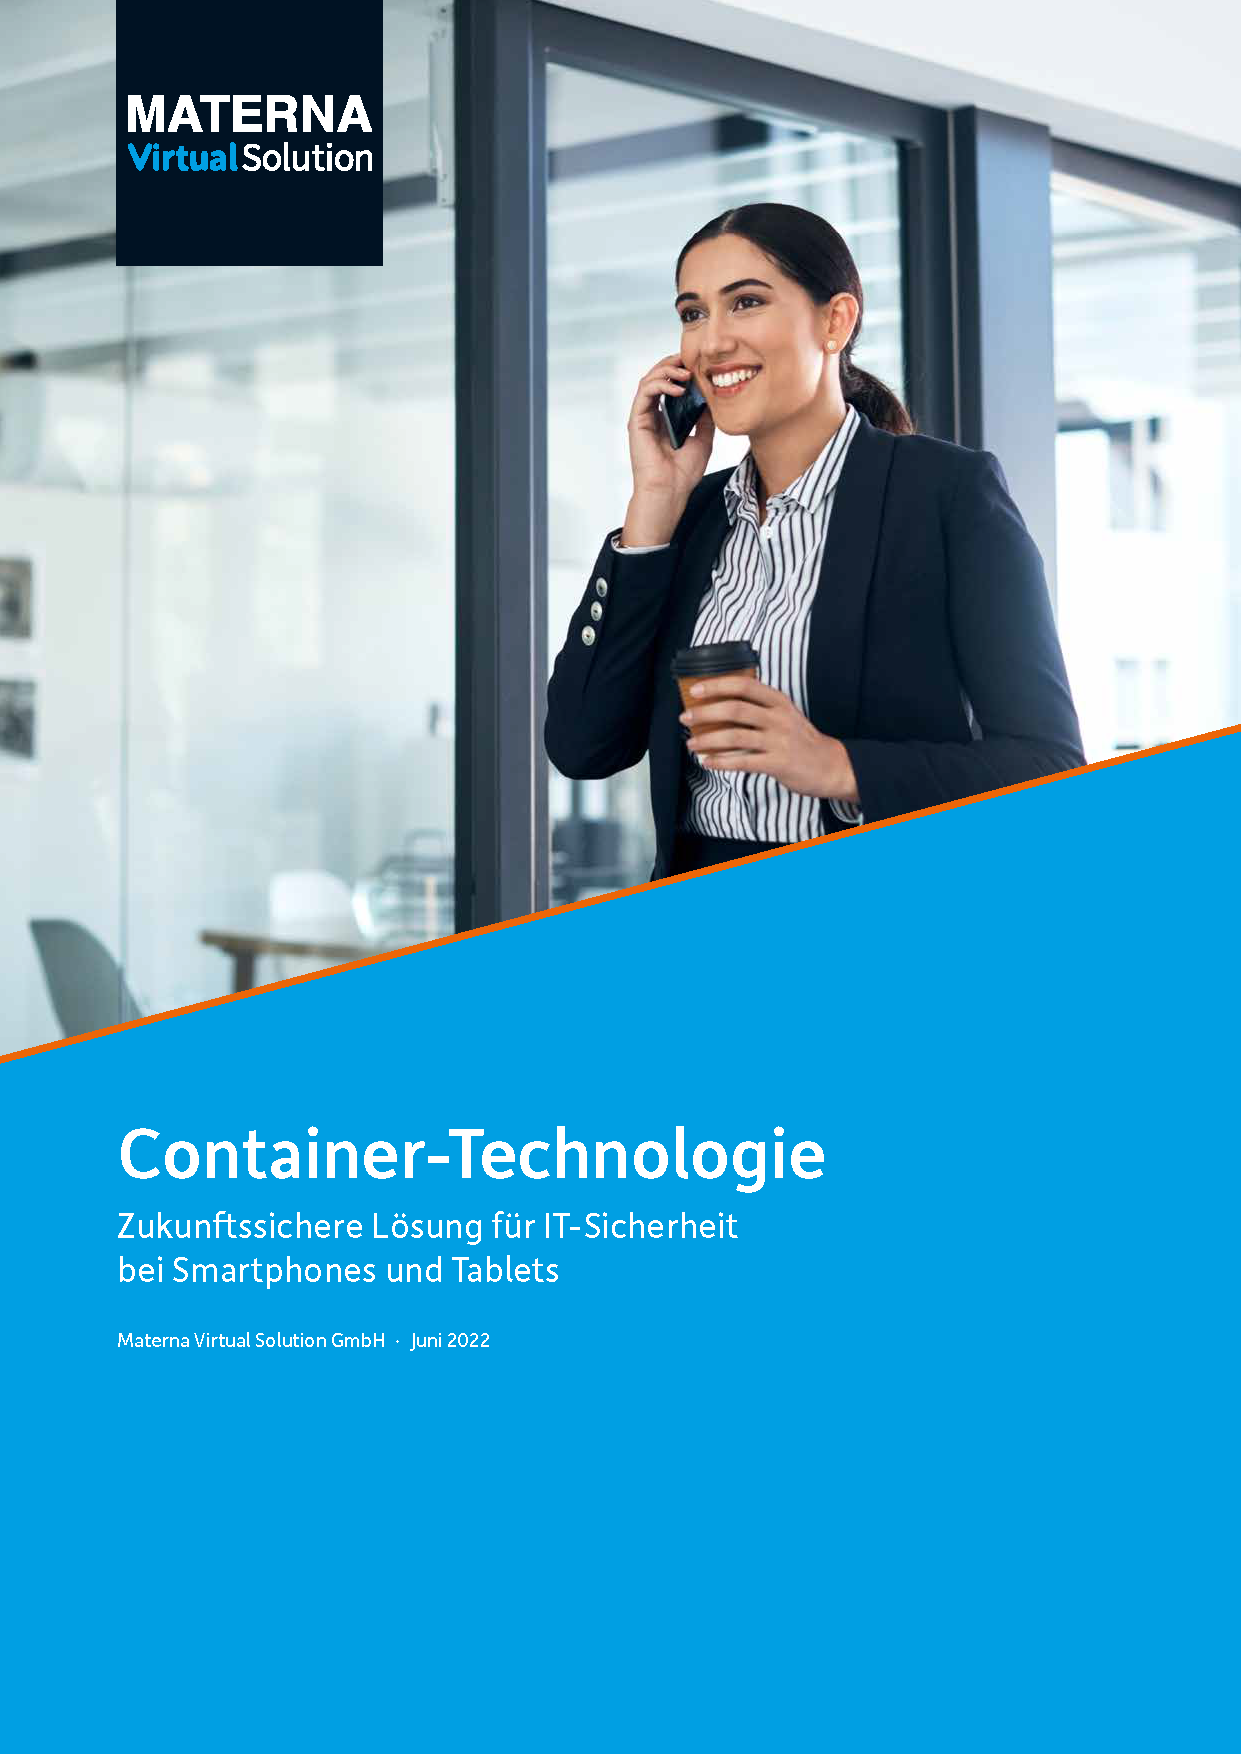 Whitepaper "Container-Technologie"